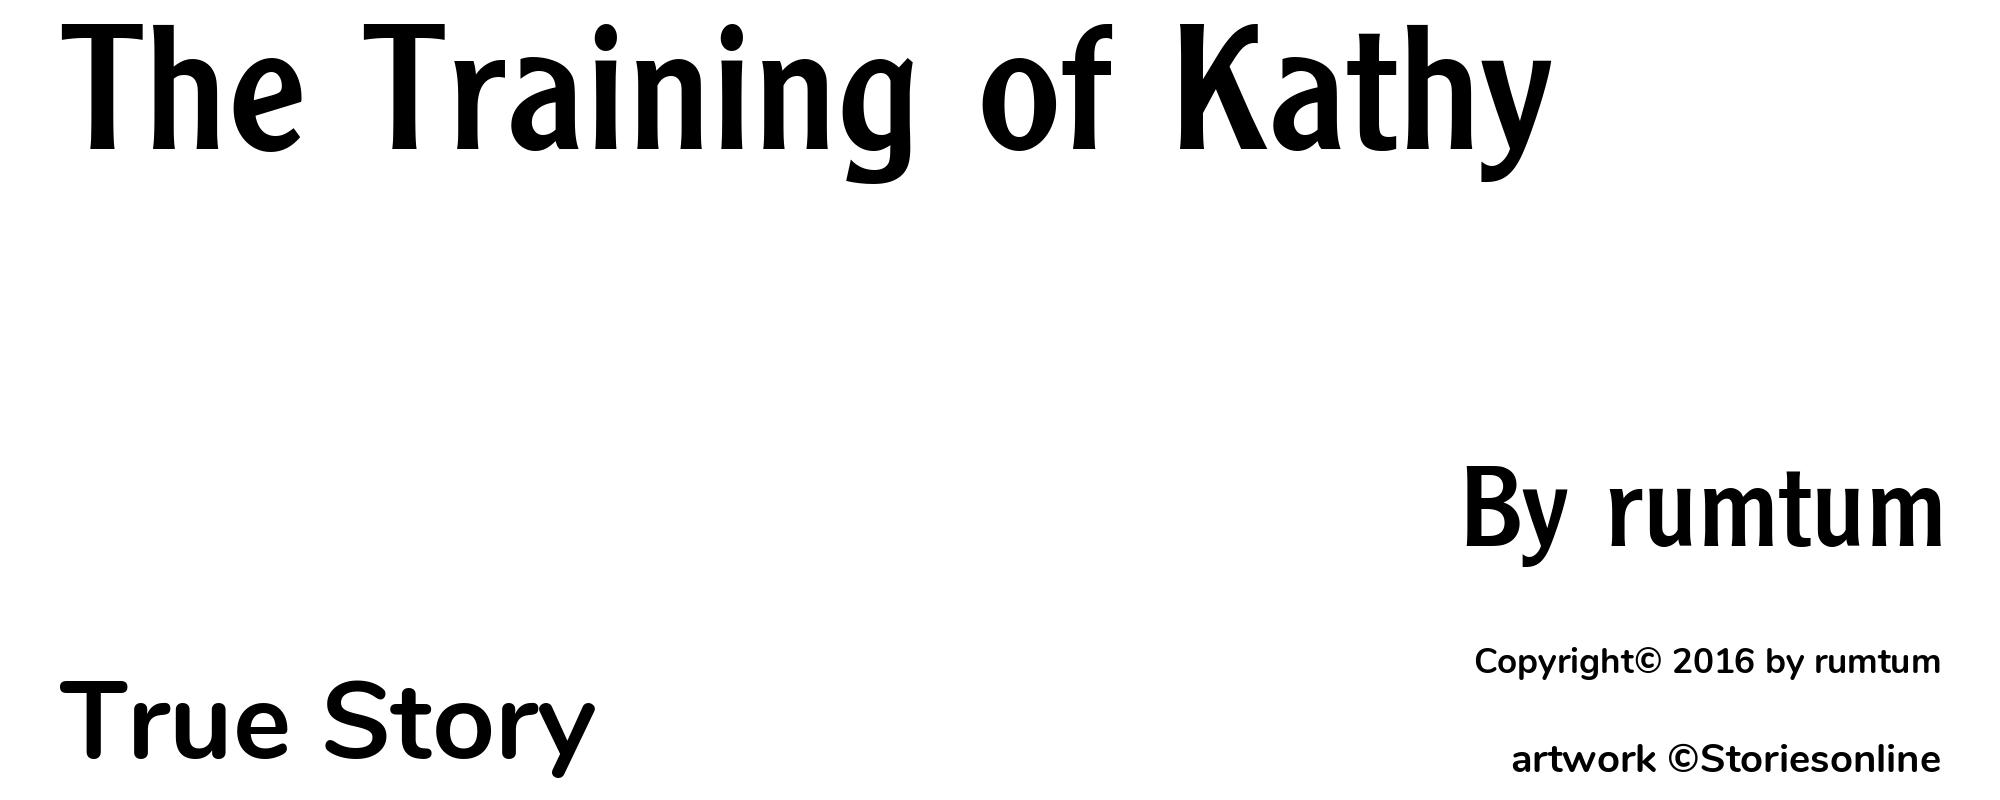 The Training of Kathy - Cover